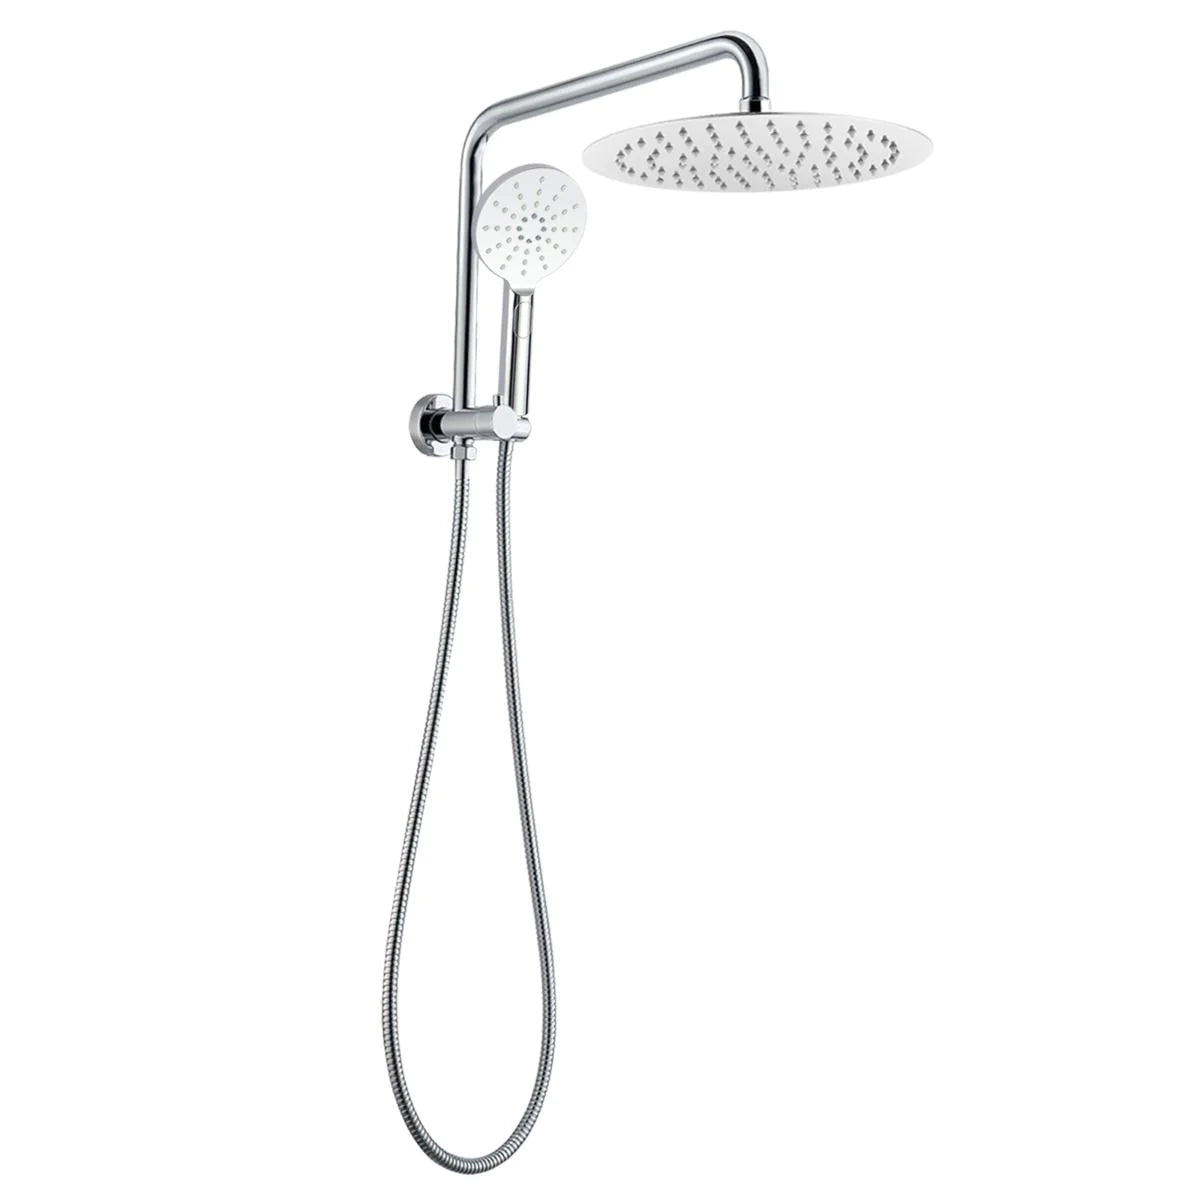 Round Shower Station with Top water Inlet, Sleek and Functional-Chrome-CH2138-SH-N+CH0007-SH+CH-R11-HHS